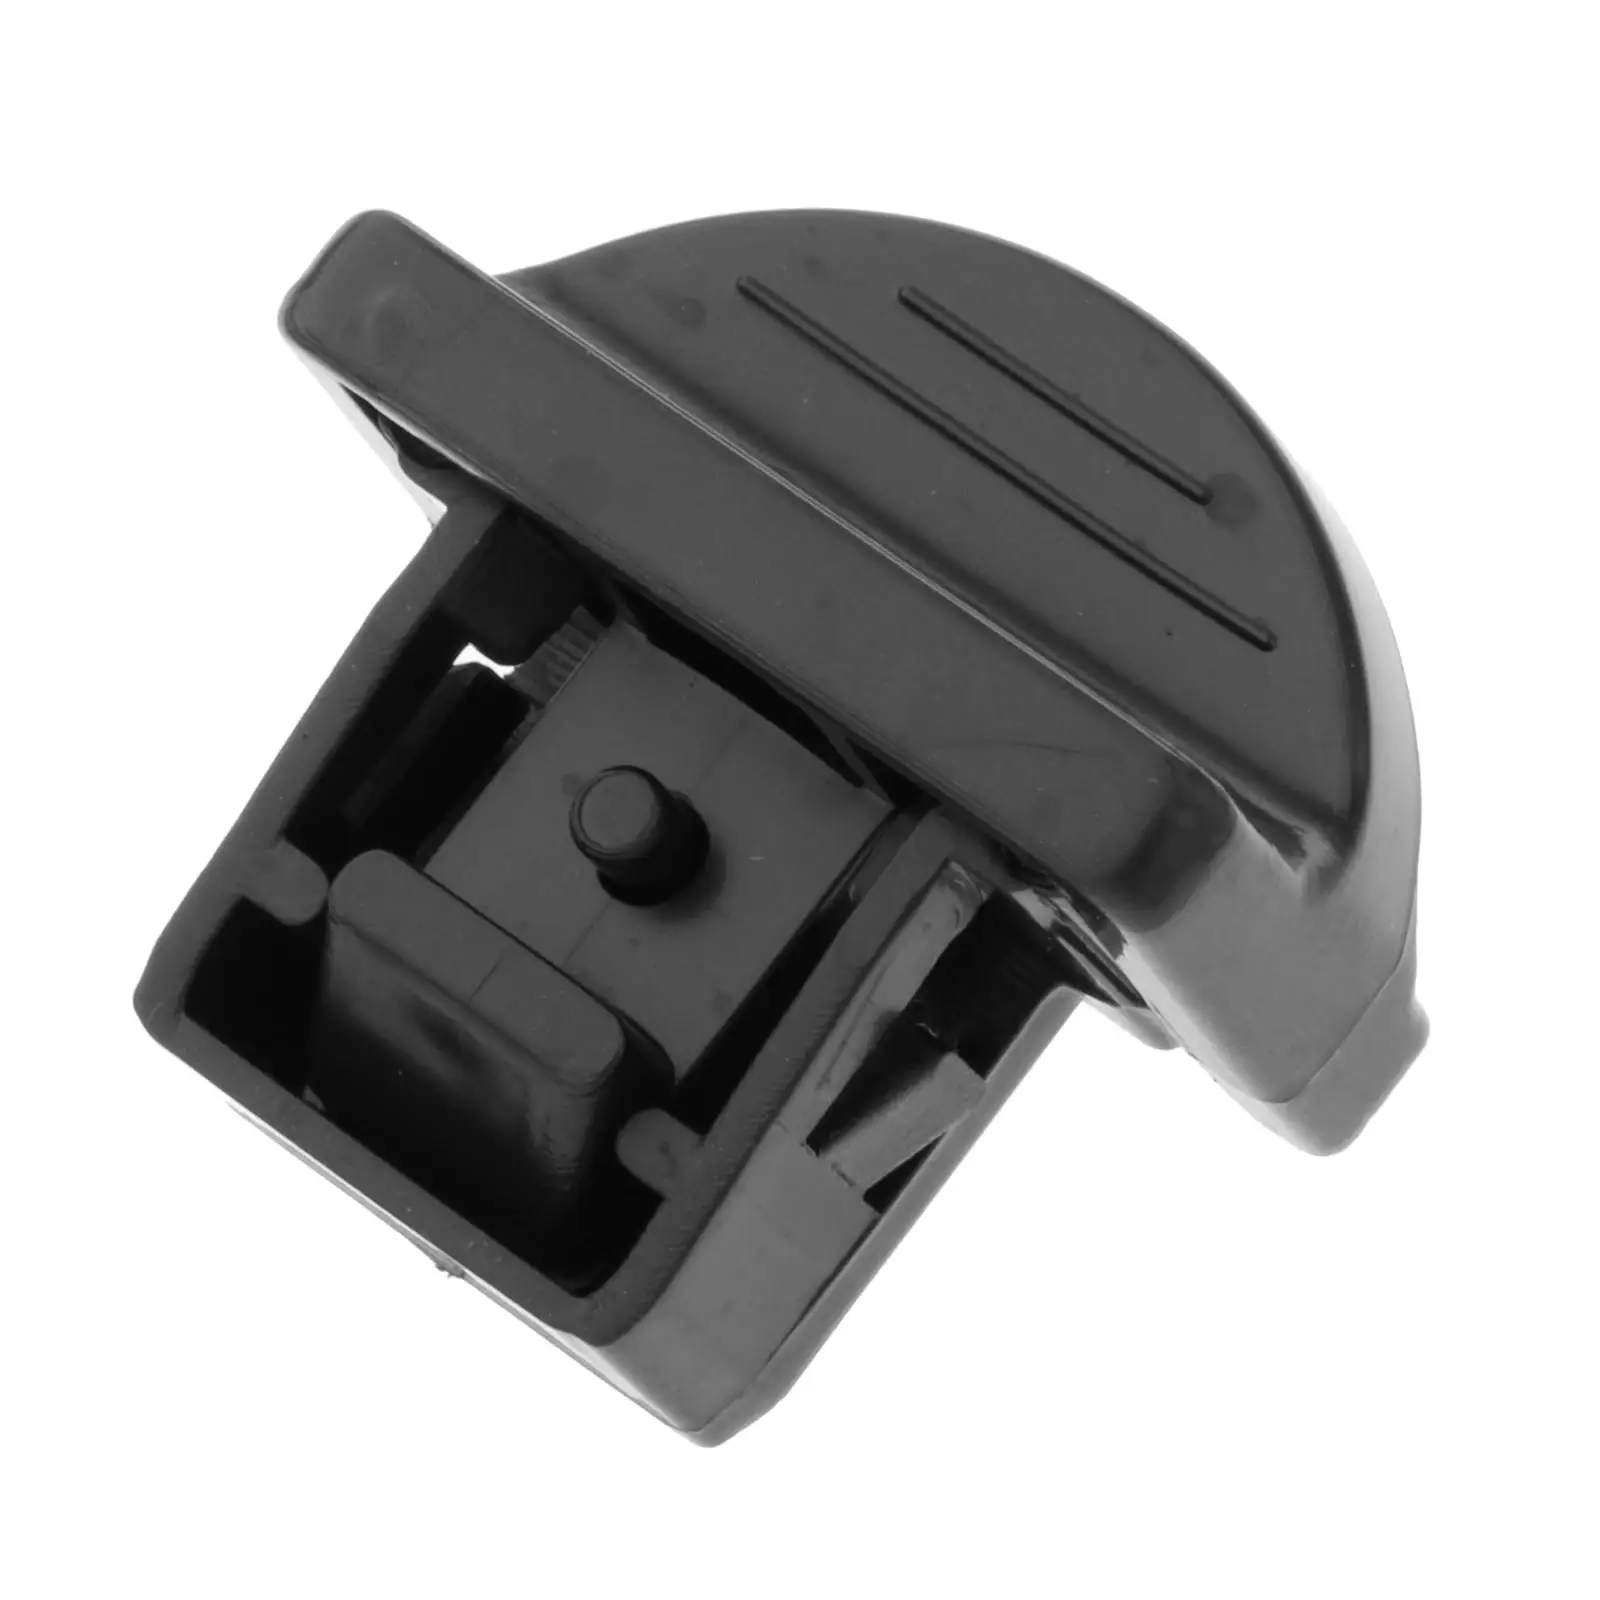 Glove Box Lid Latch Fastener Replaces for Yamaha GU2-62875-02-00 Parts Black